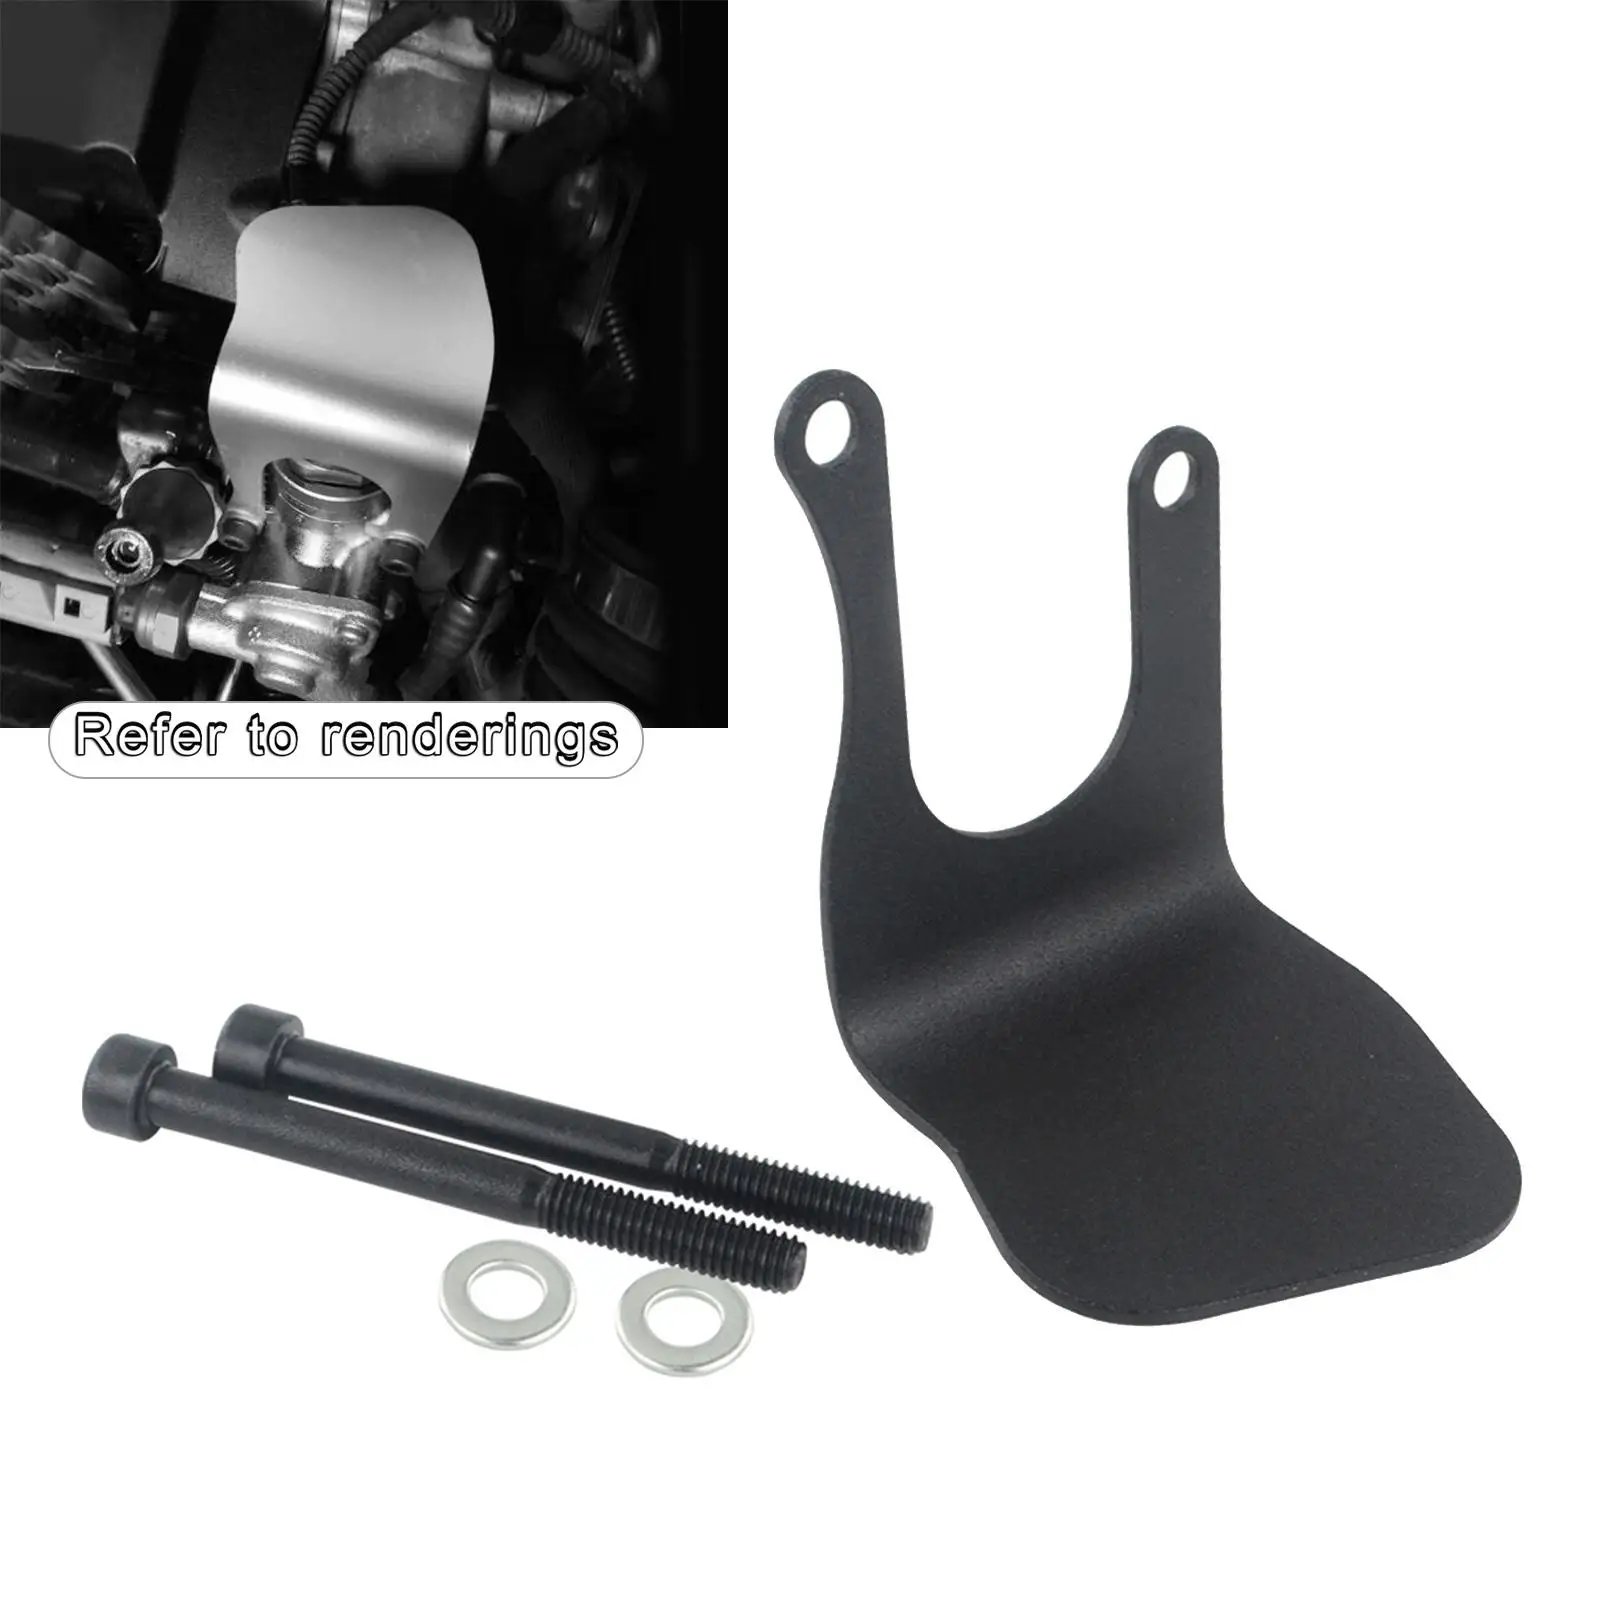 Hpfp    Interior   for Golf MK5 MK6 2.0  34 Easy Installation ,Fuel Pump Replacement